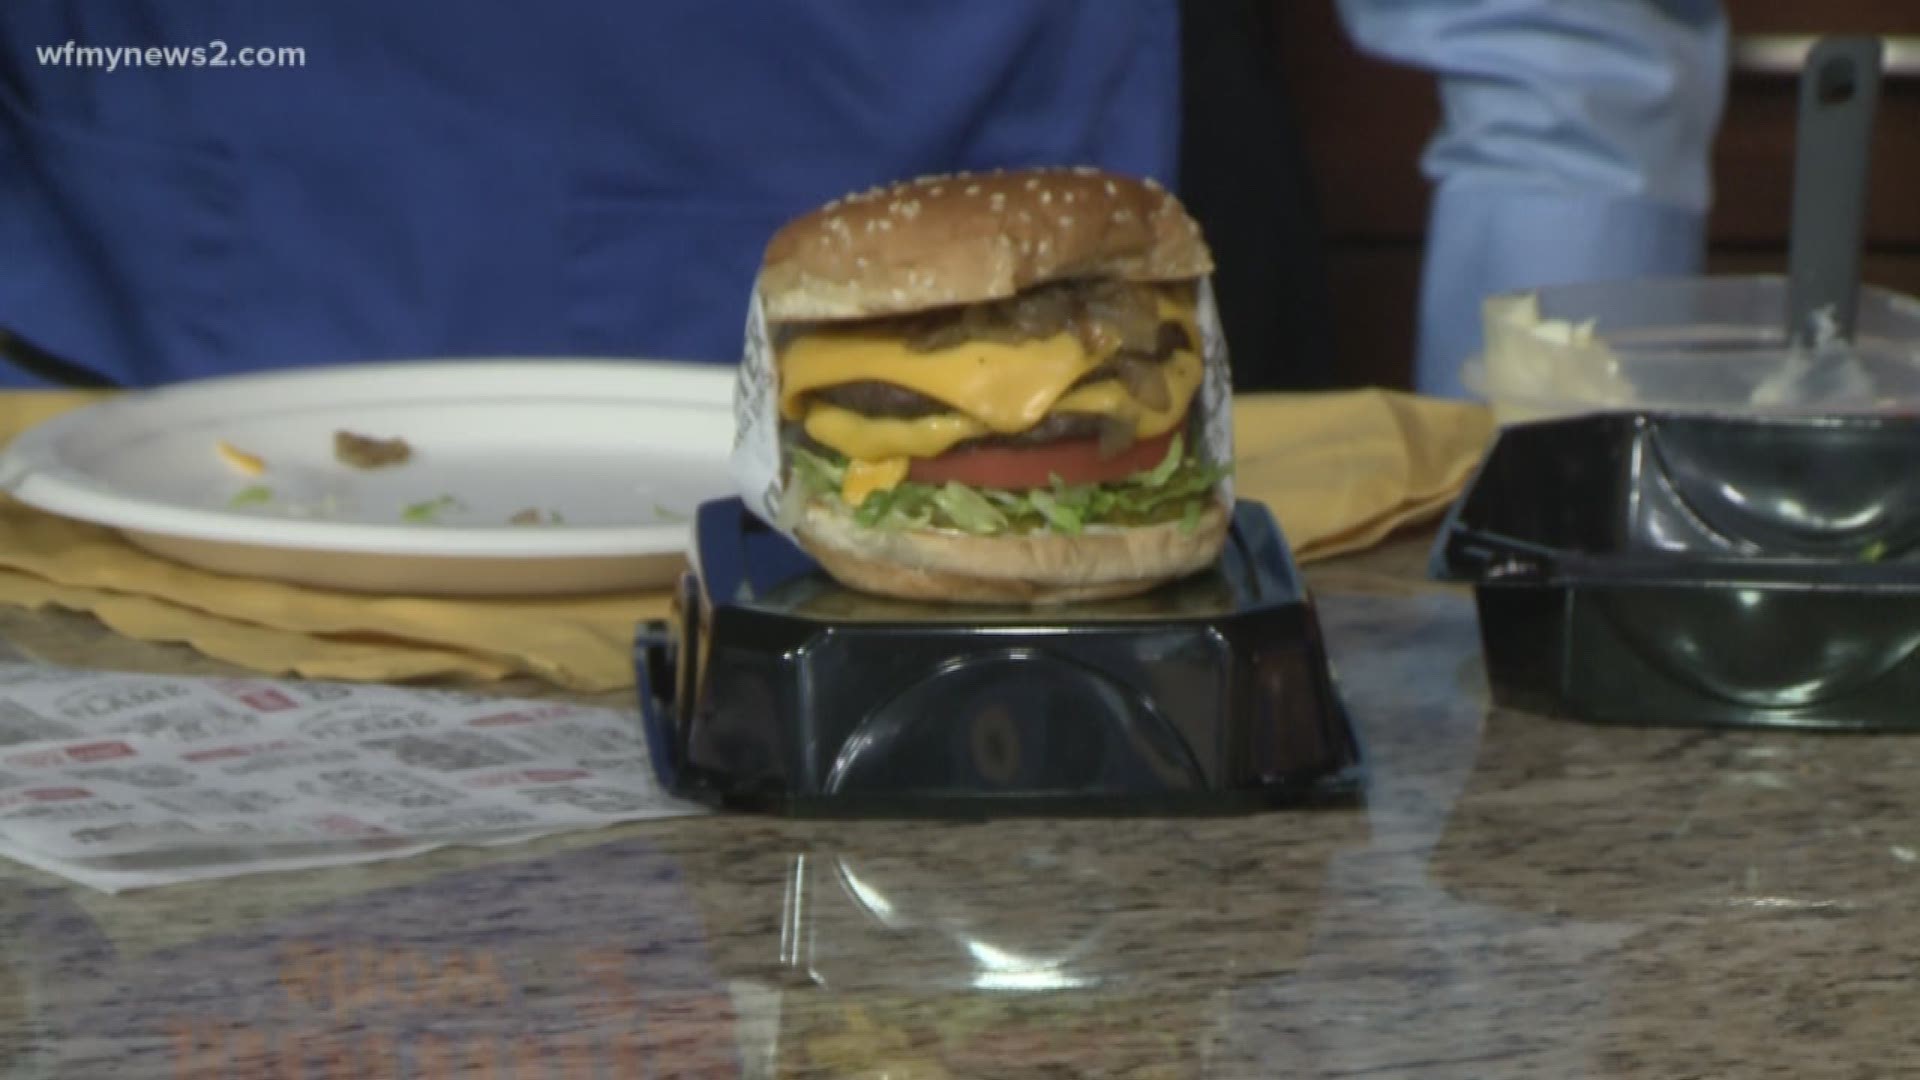 Habit Burger is in the News 2 Kitchen grilling up their double char burgers.